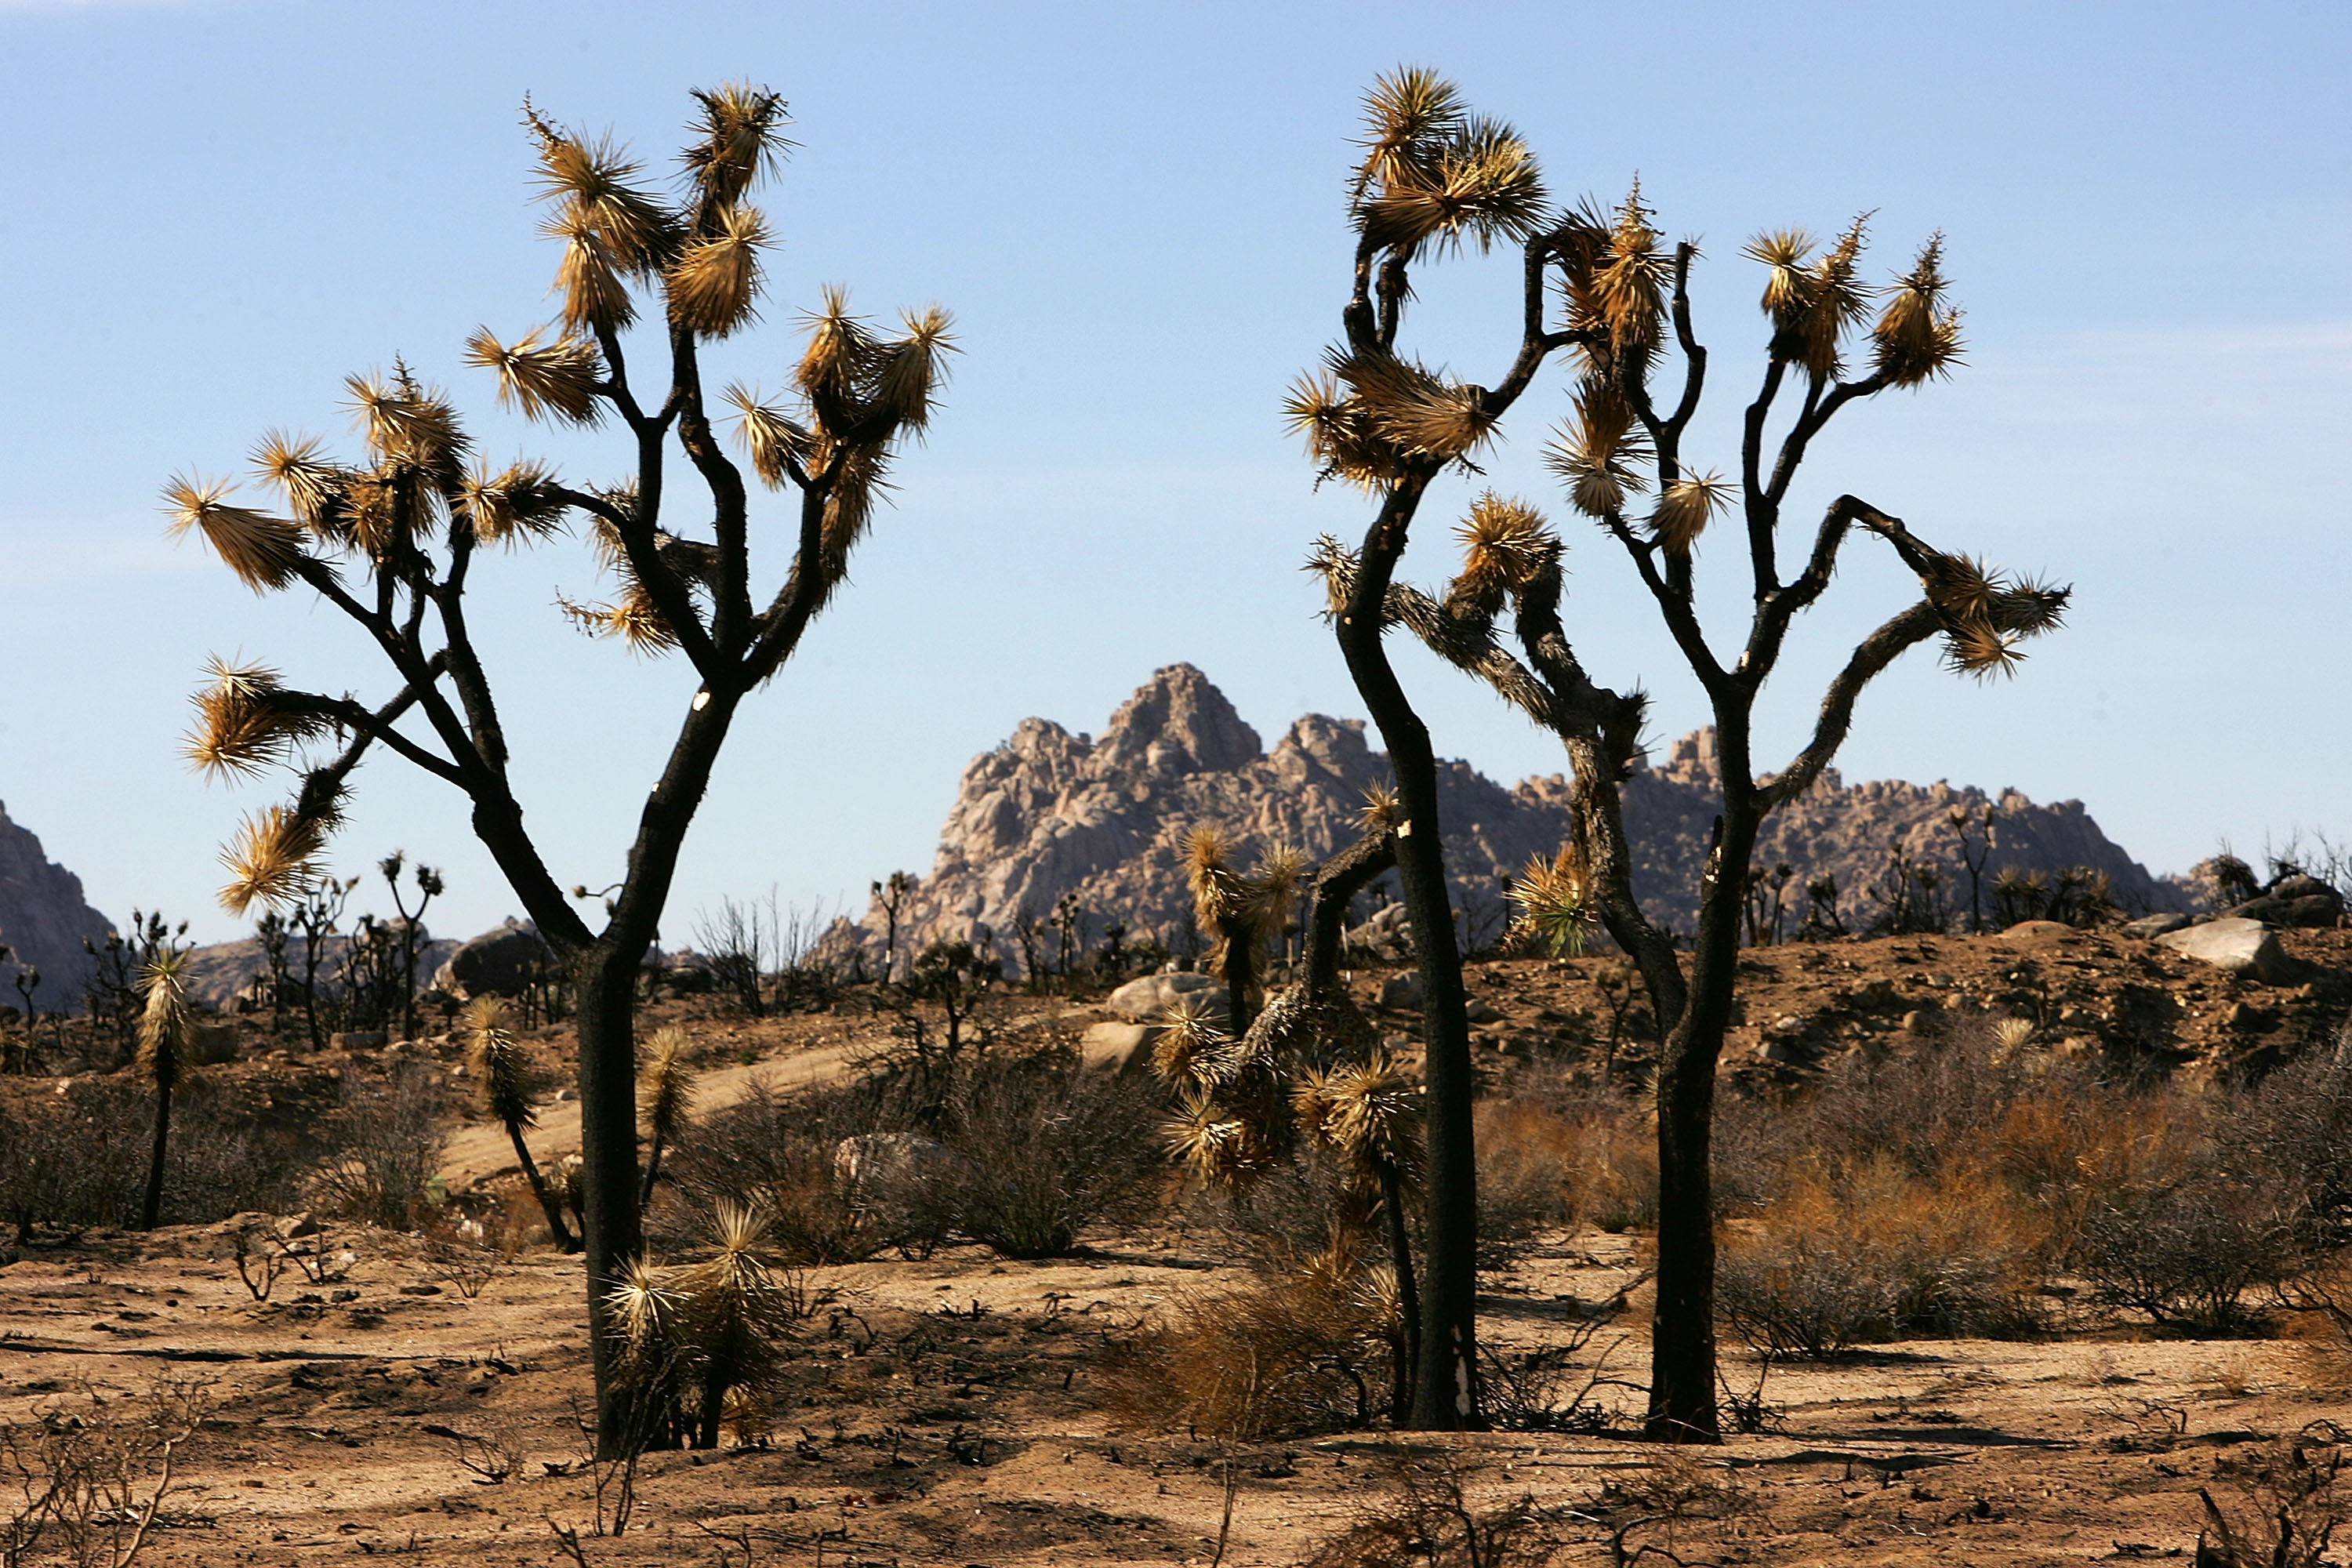 Scientists crowdfund to save the Joshua tree by sequencing its genome